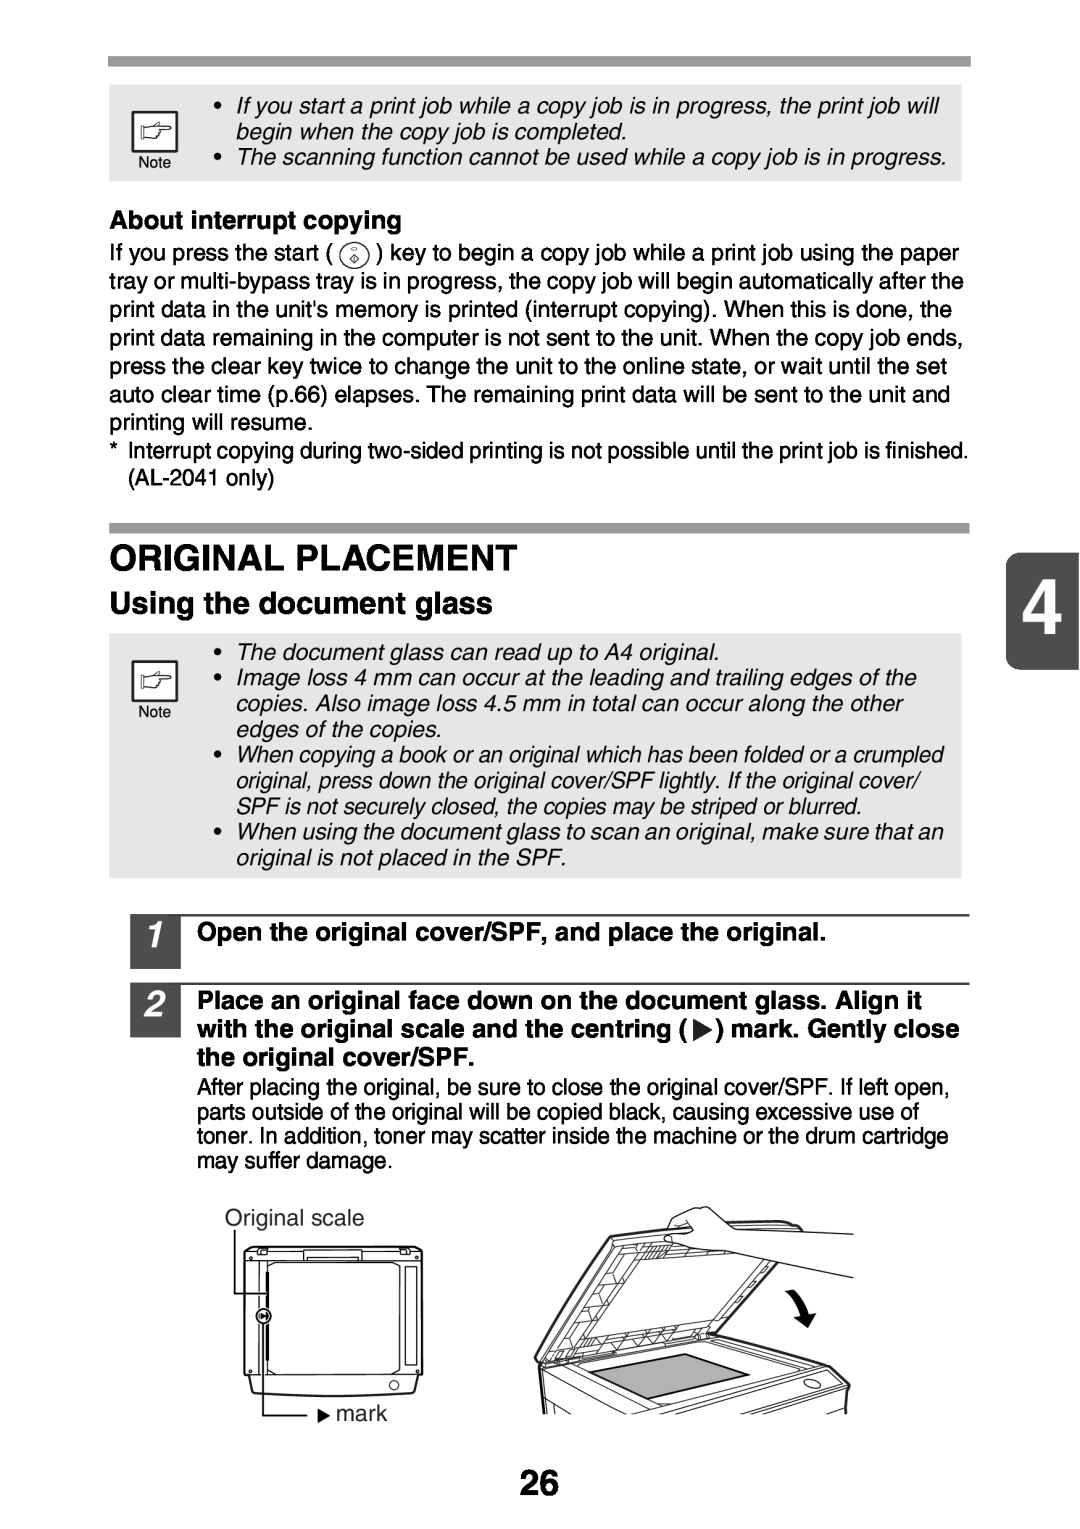 Sharp AL2041, AL2021 manual Original Placement, Using the document glass, About interrupt copying 